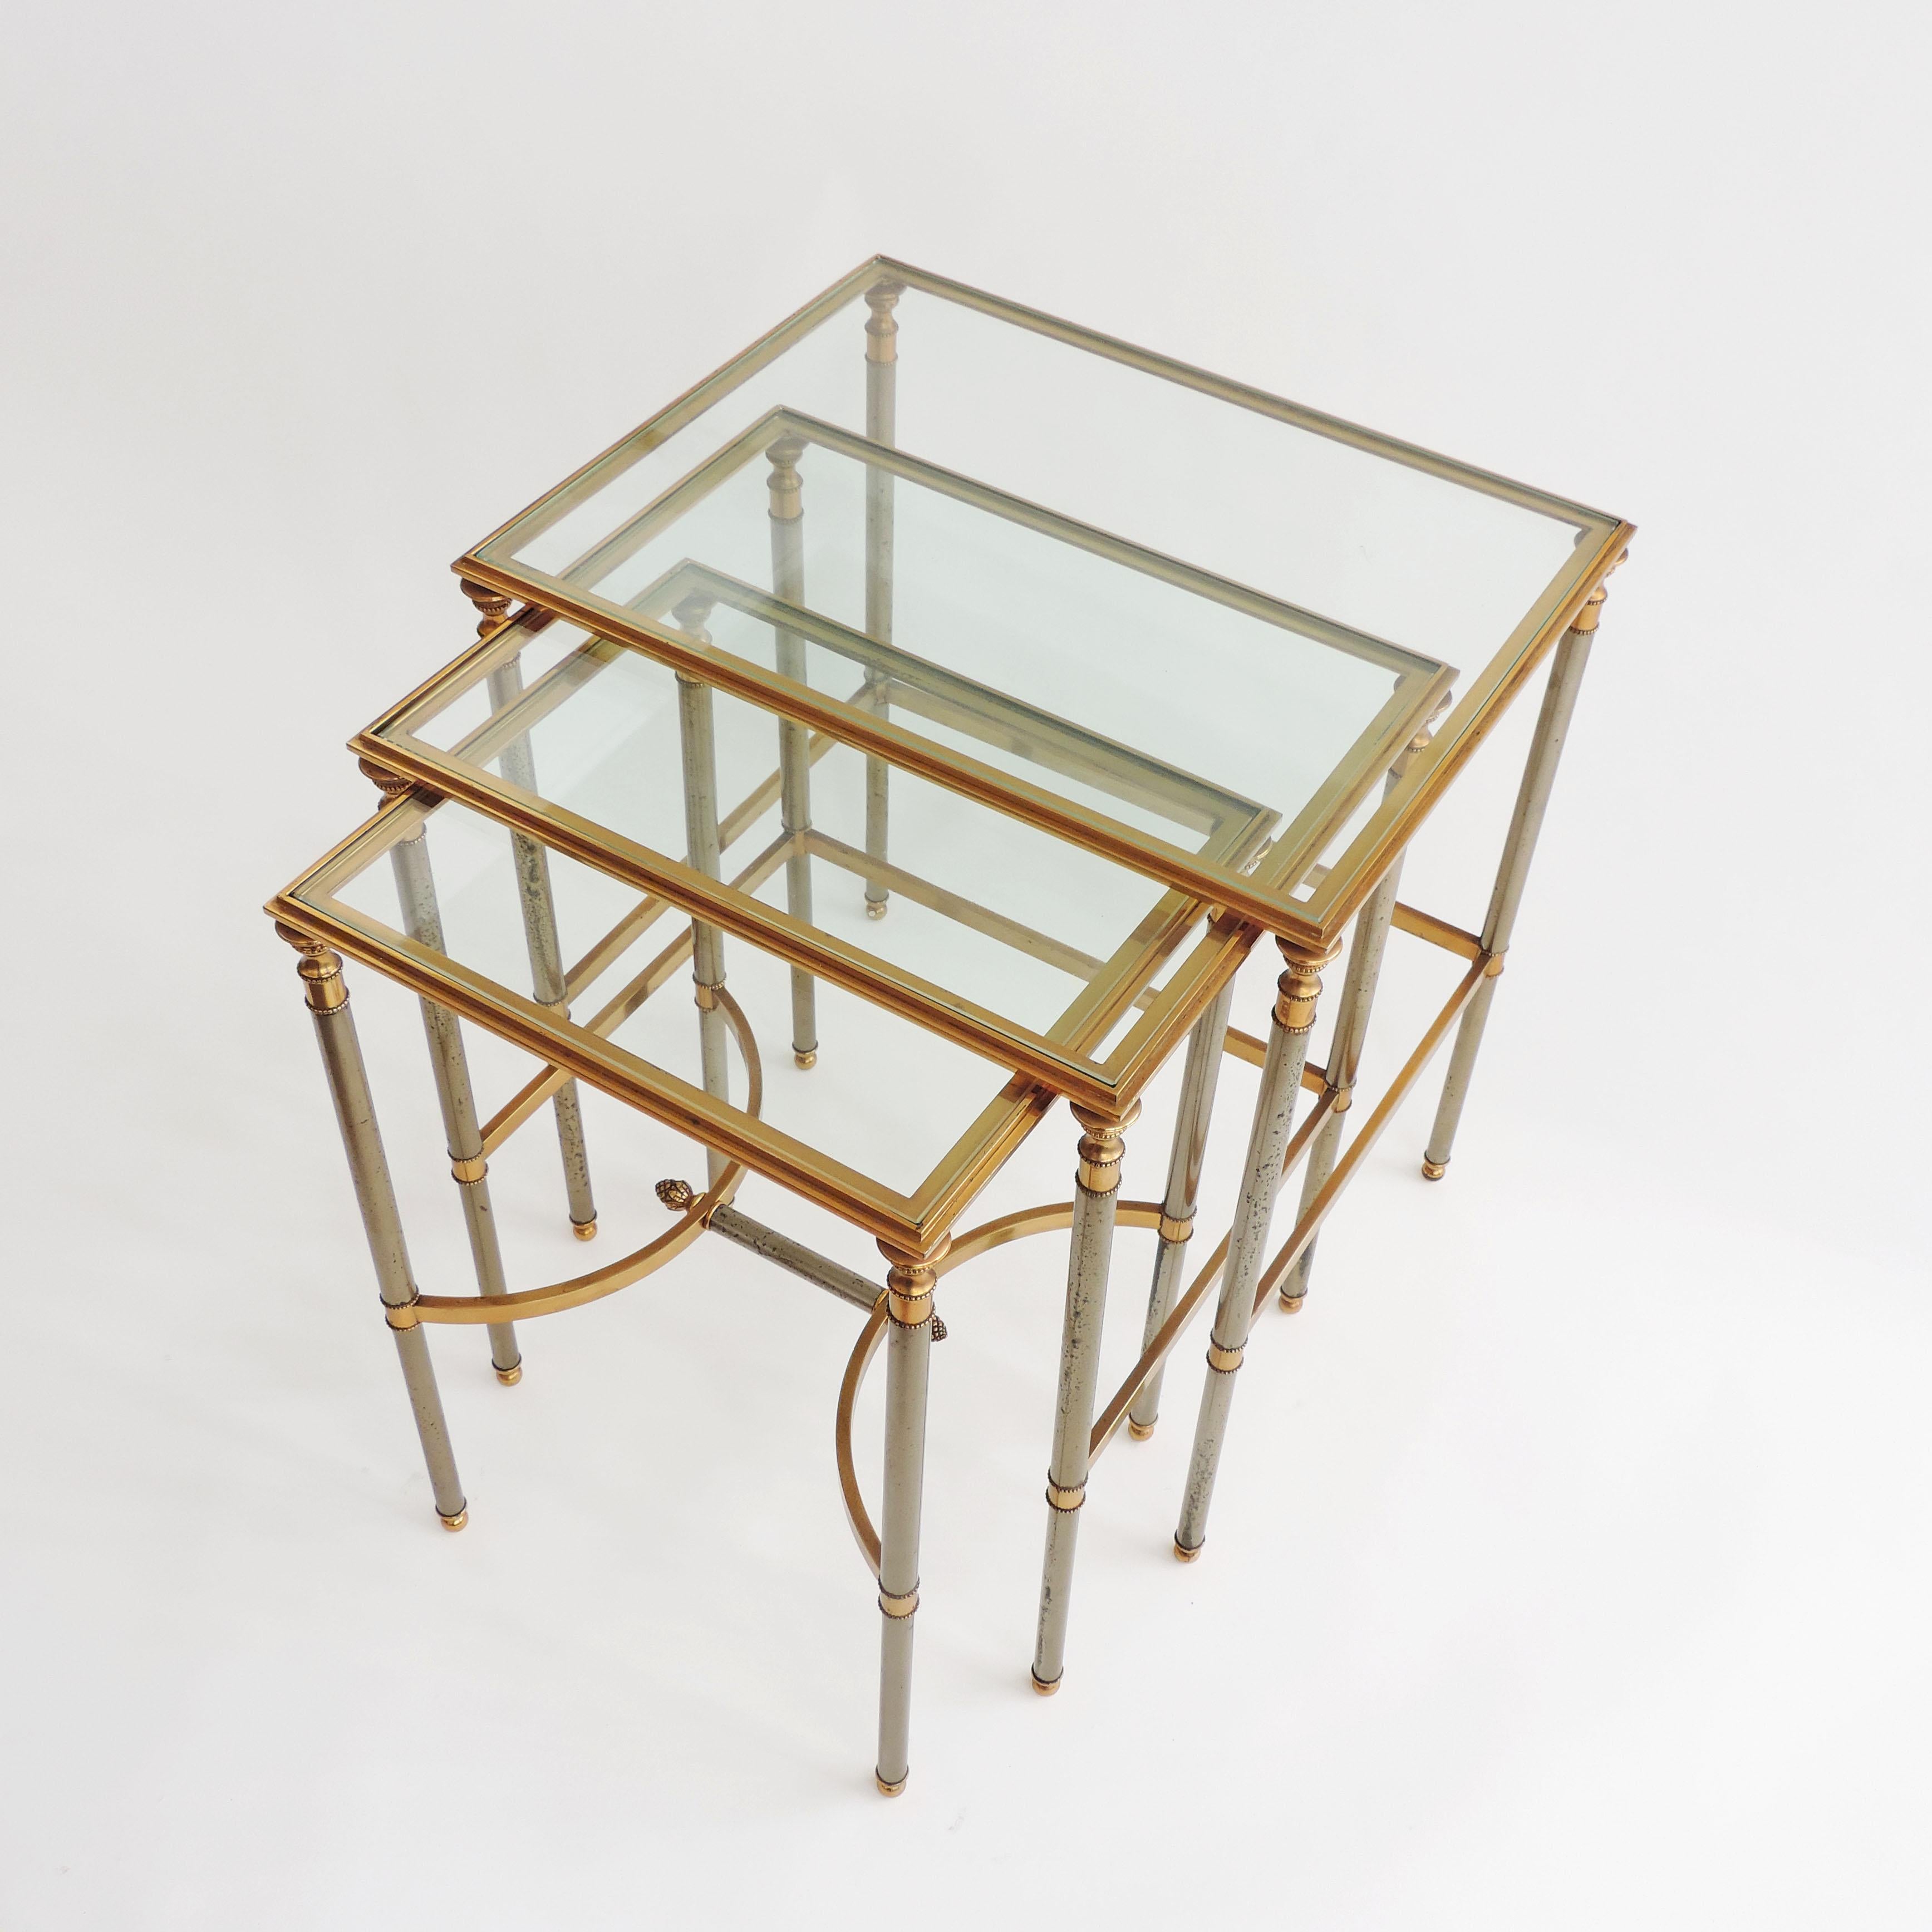 French 1970s neo-classical steel and brass nesting tables.
Attributed to Maison Jansen.